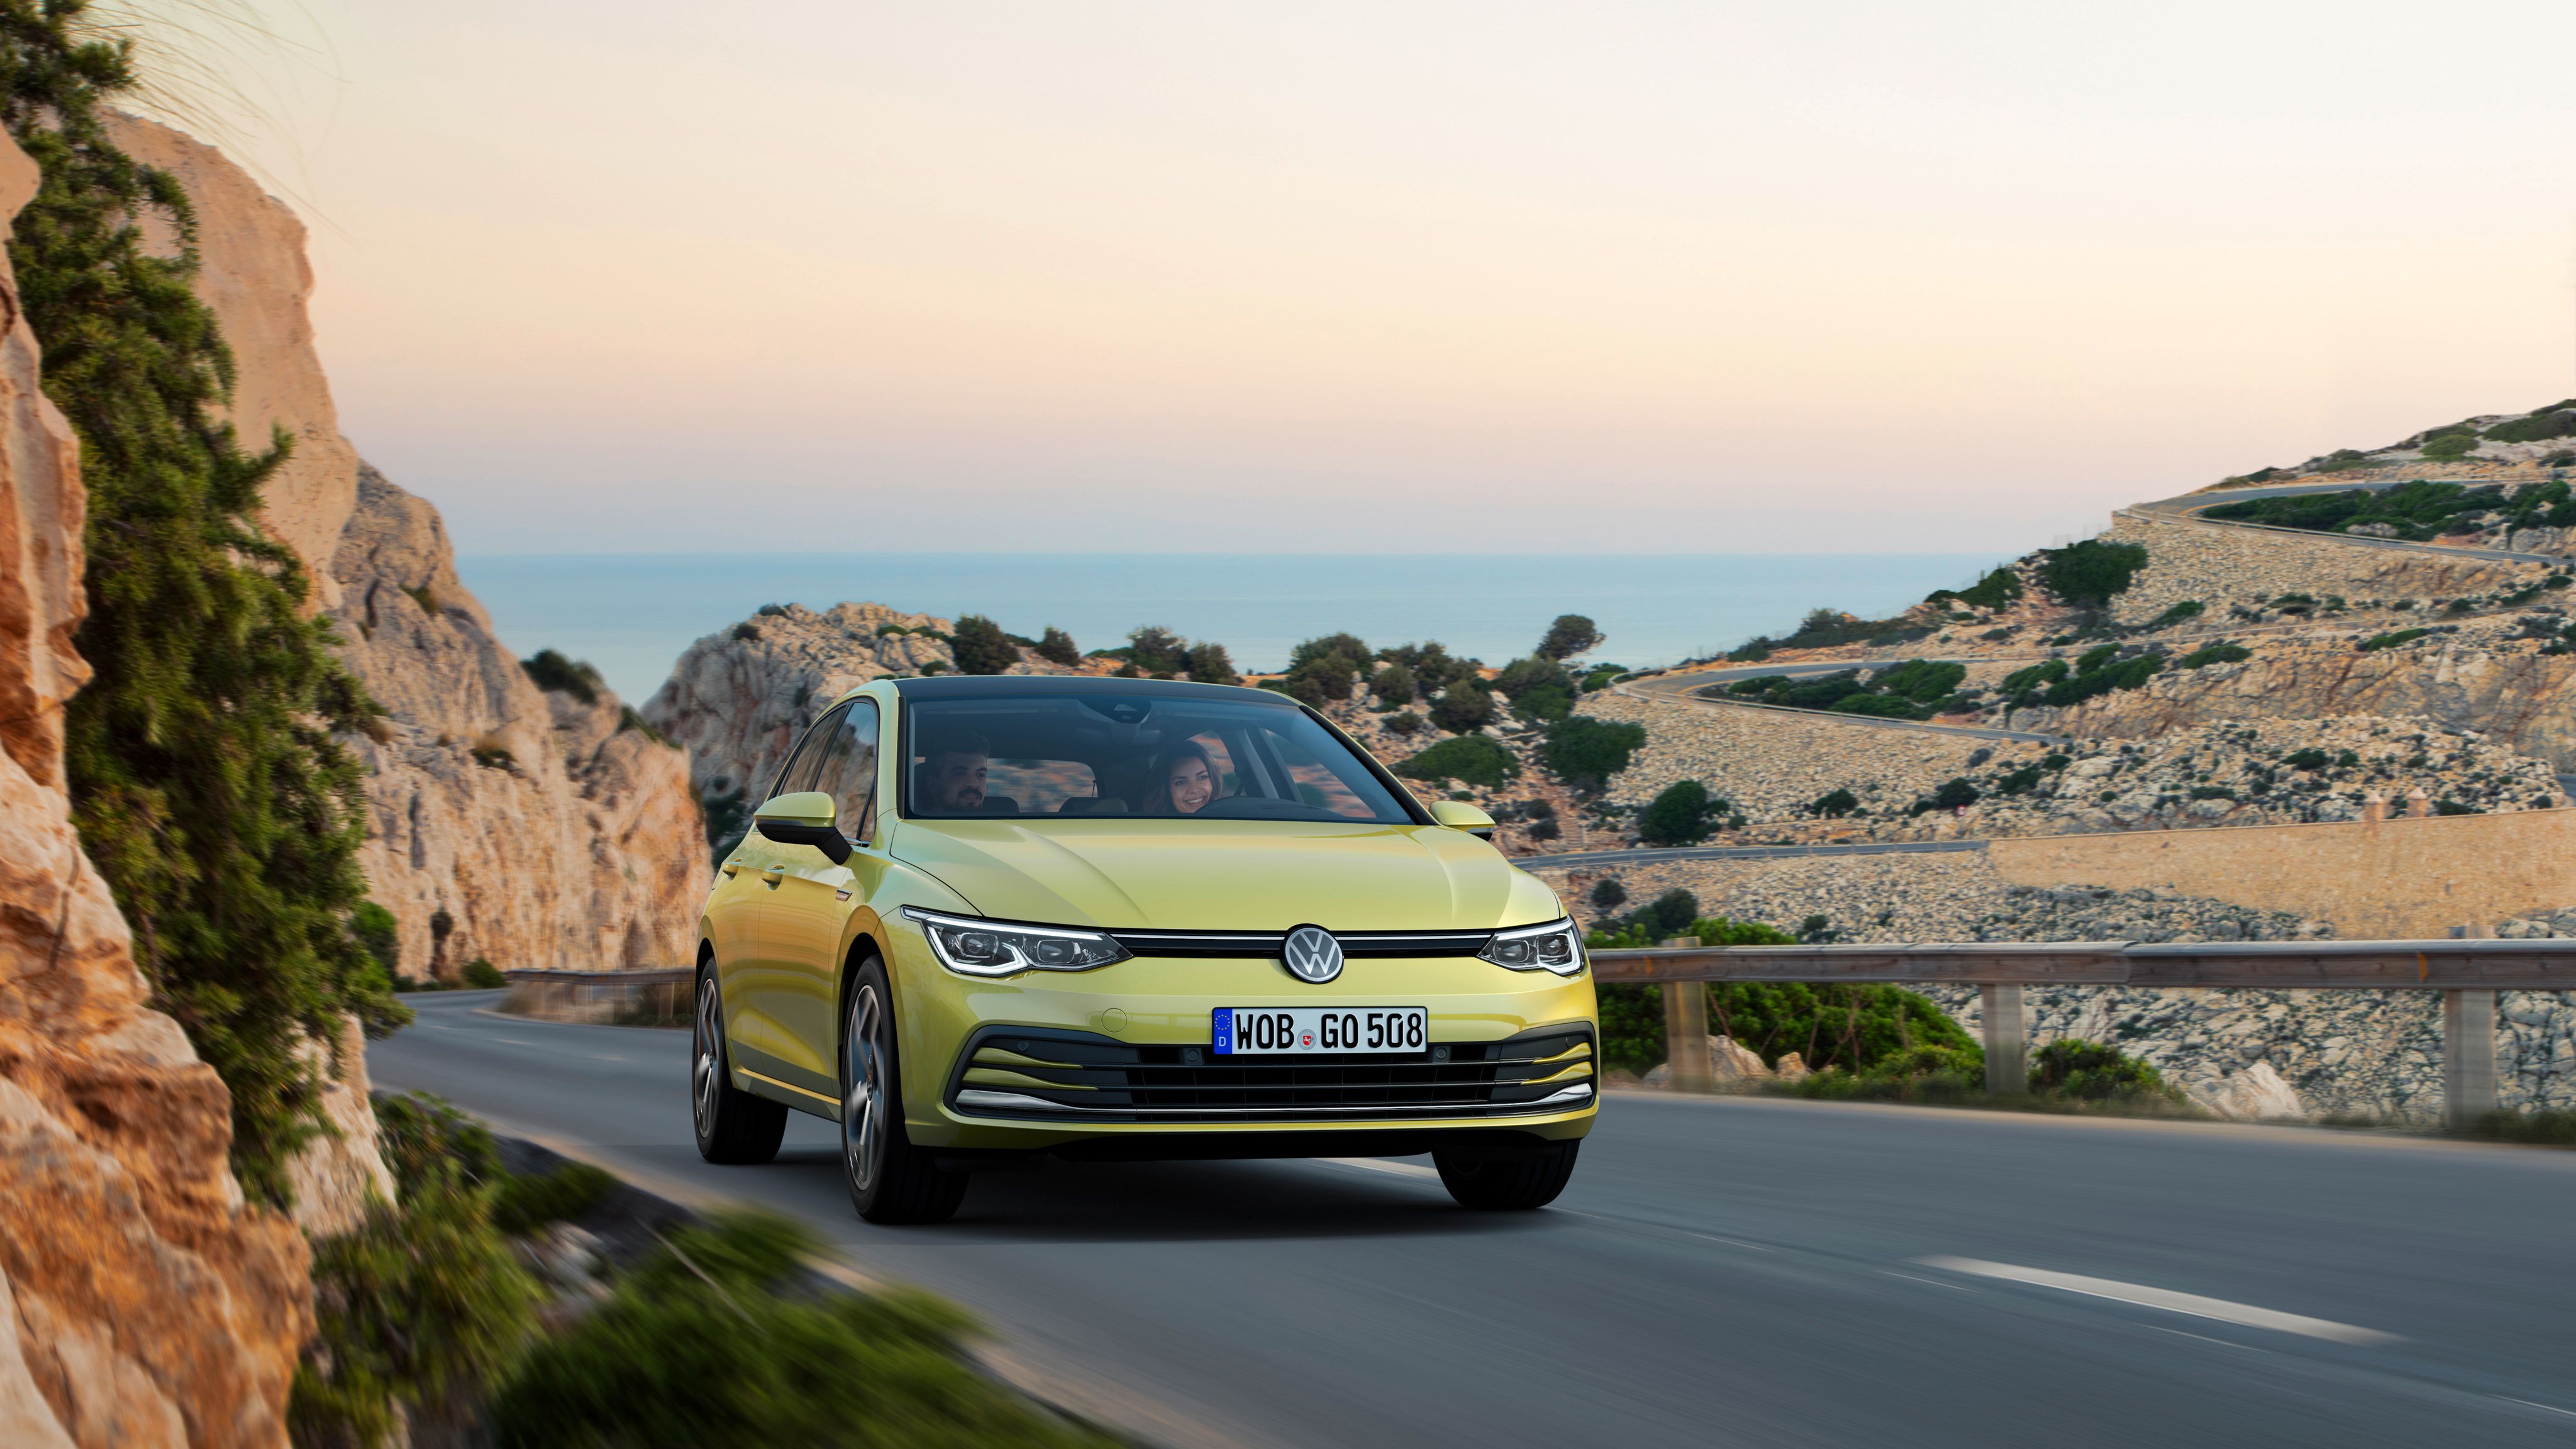 The Volkswagen Golf May Only Have One Generation Left Before Retirement